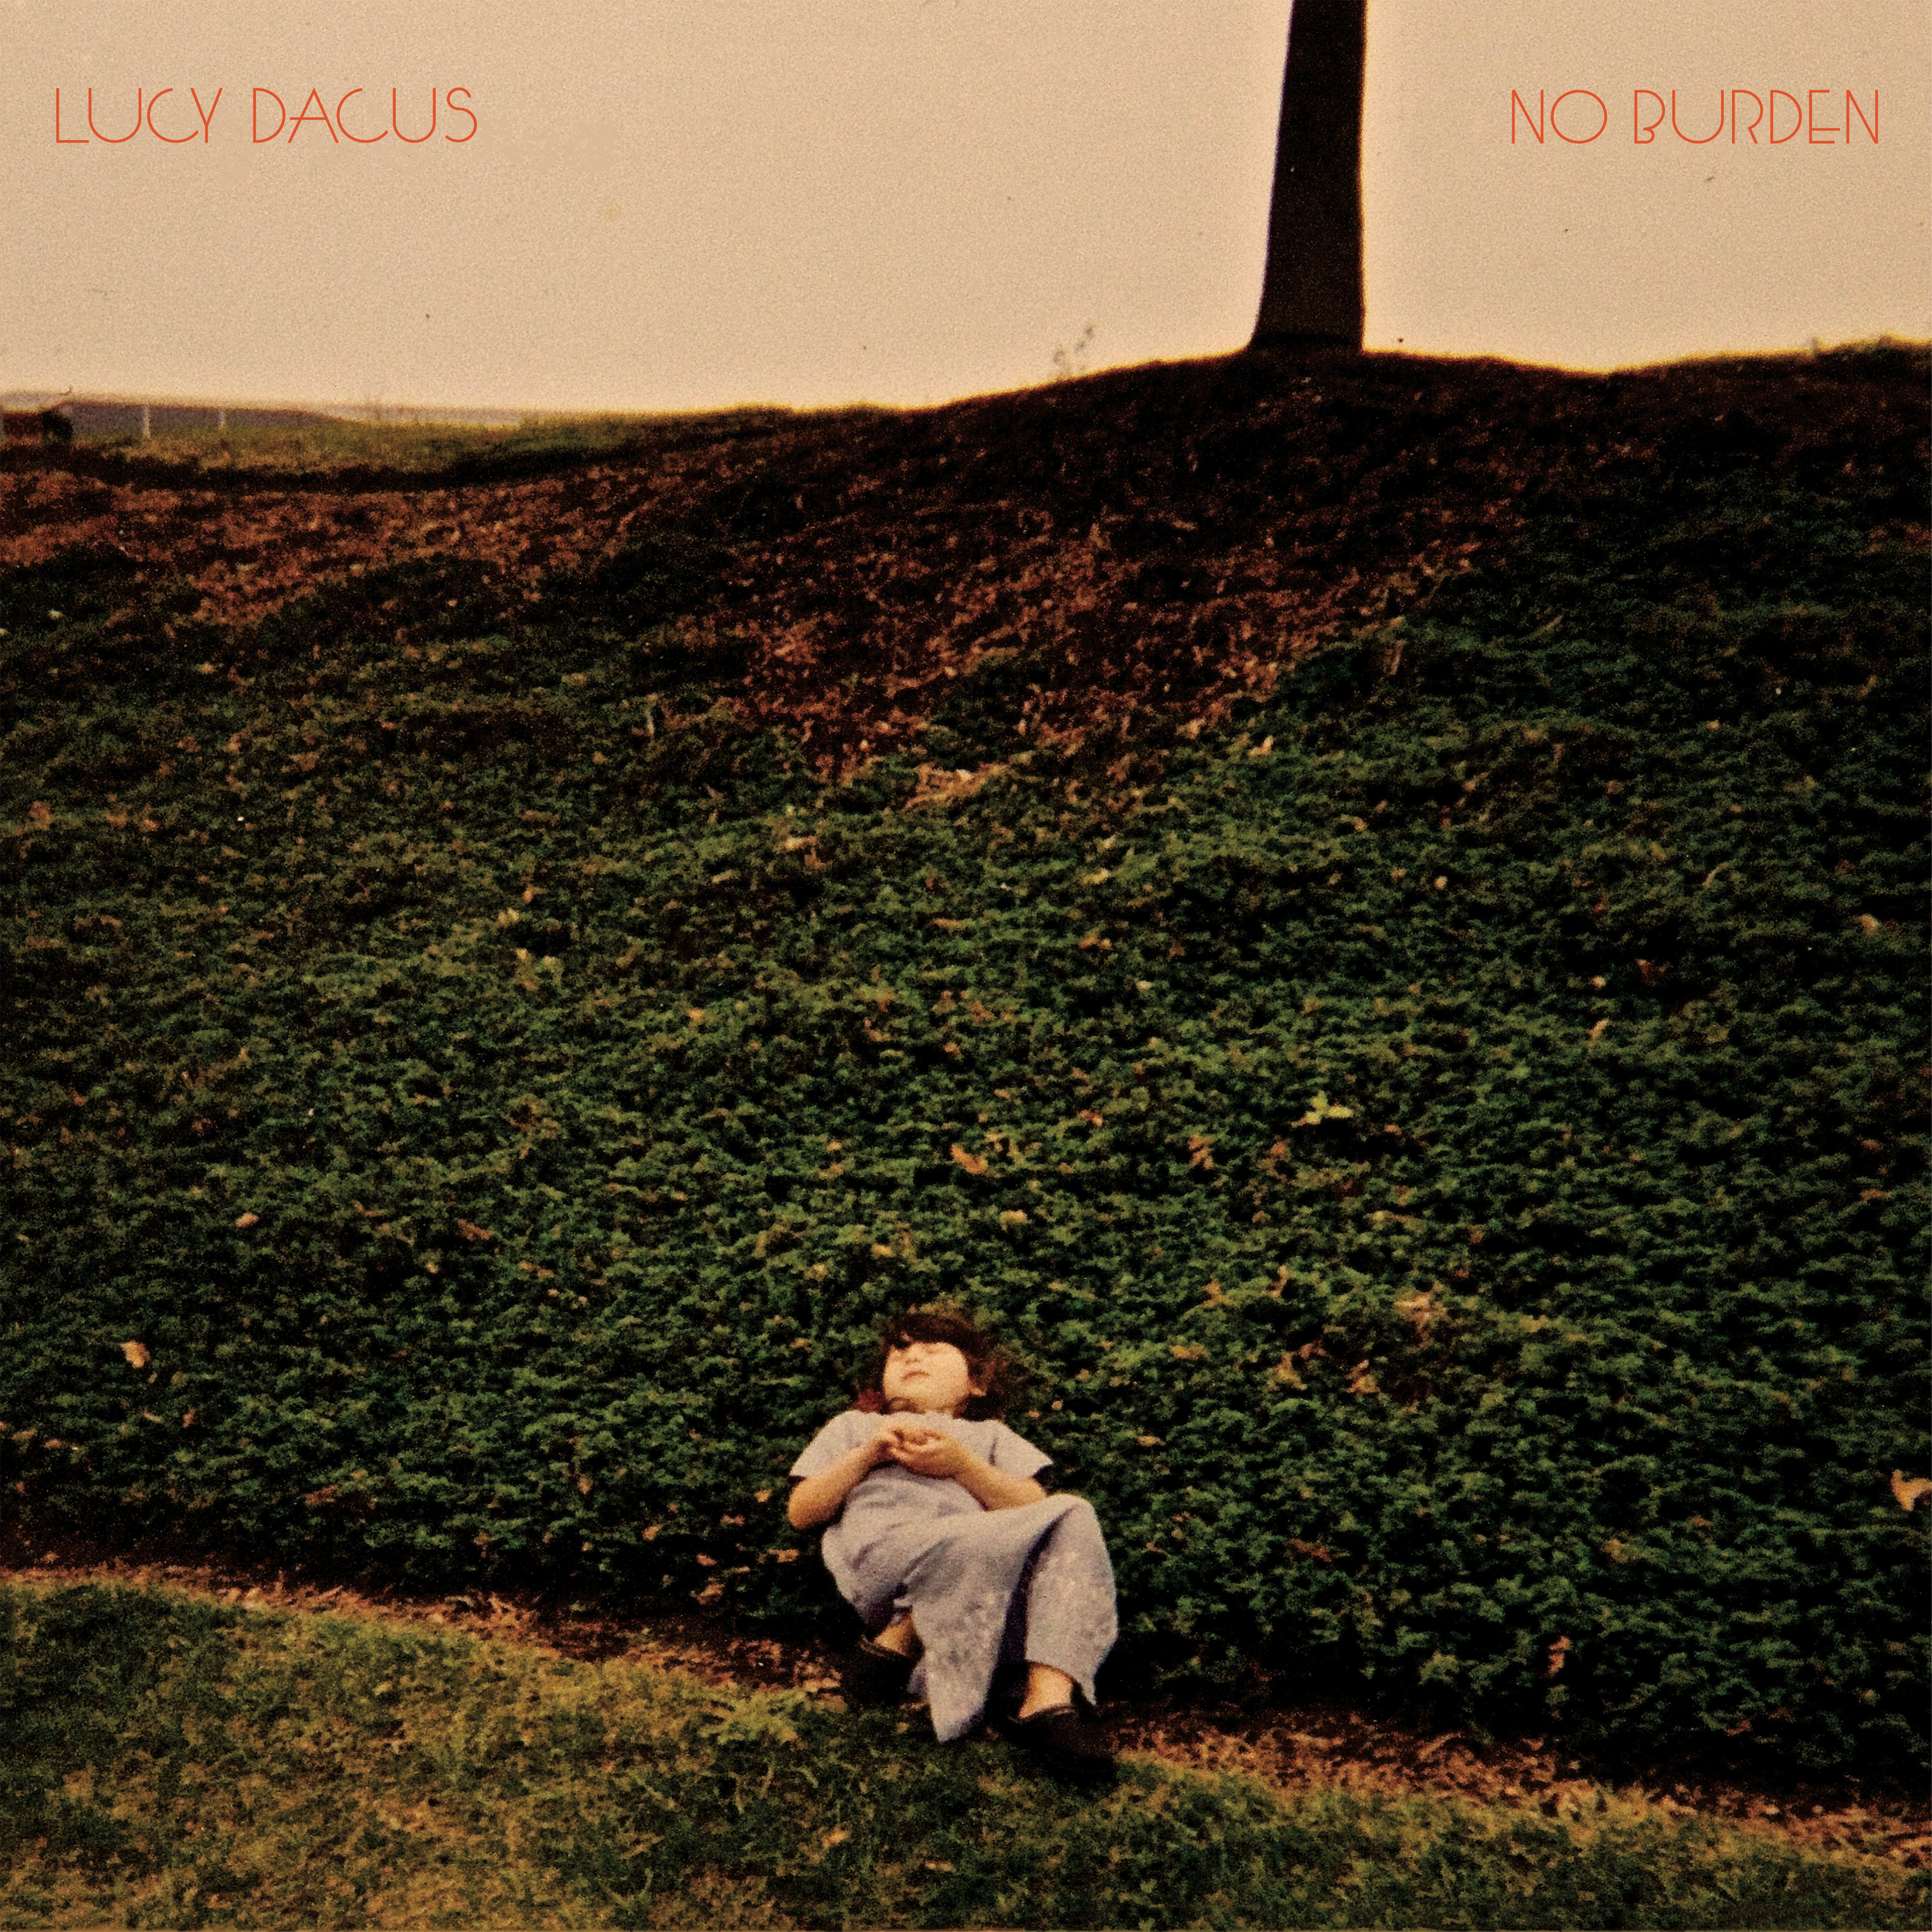 Lucy Dacus Signs to Matador, Will Reissue 'No Burden' in the Fall